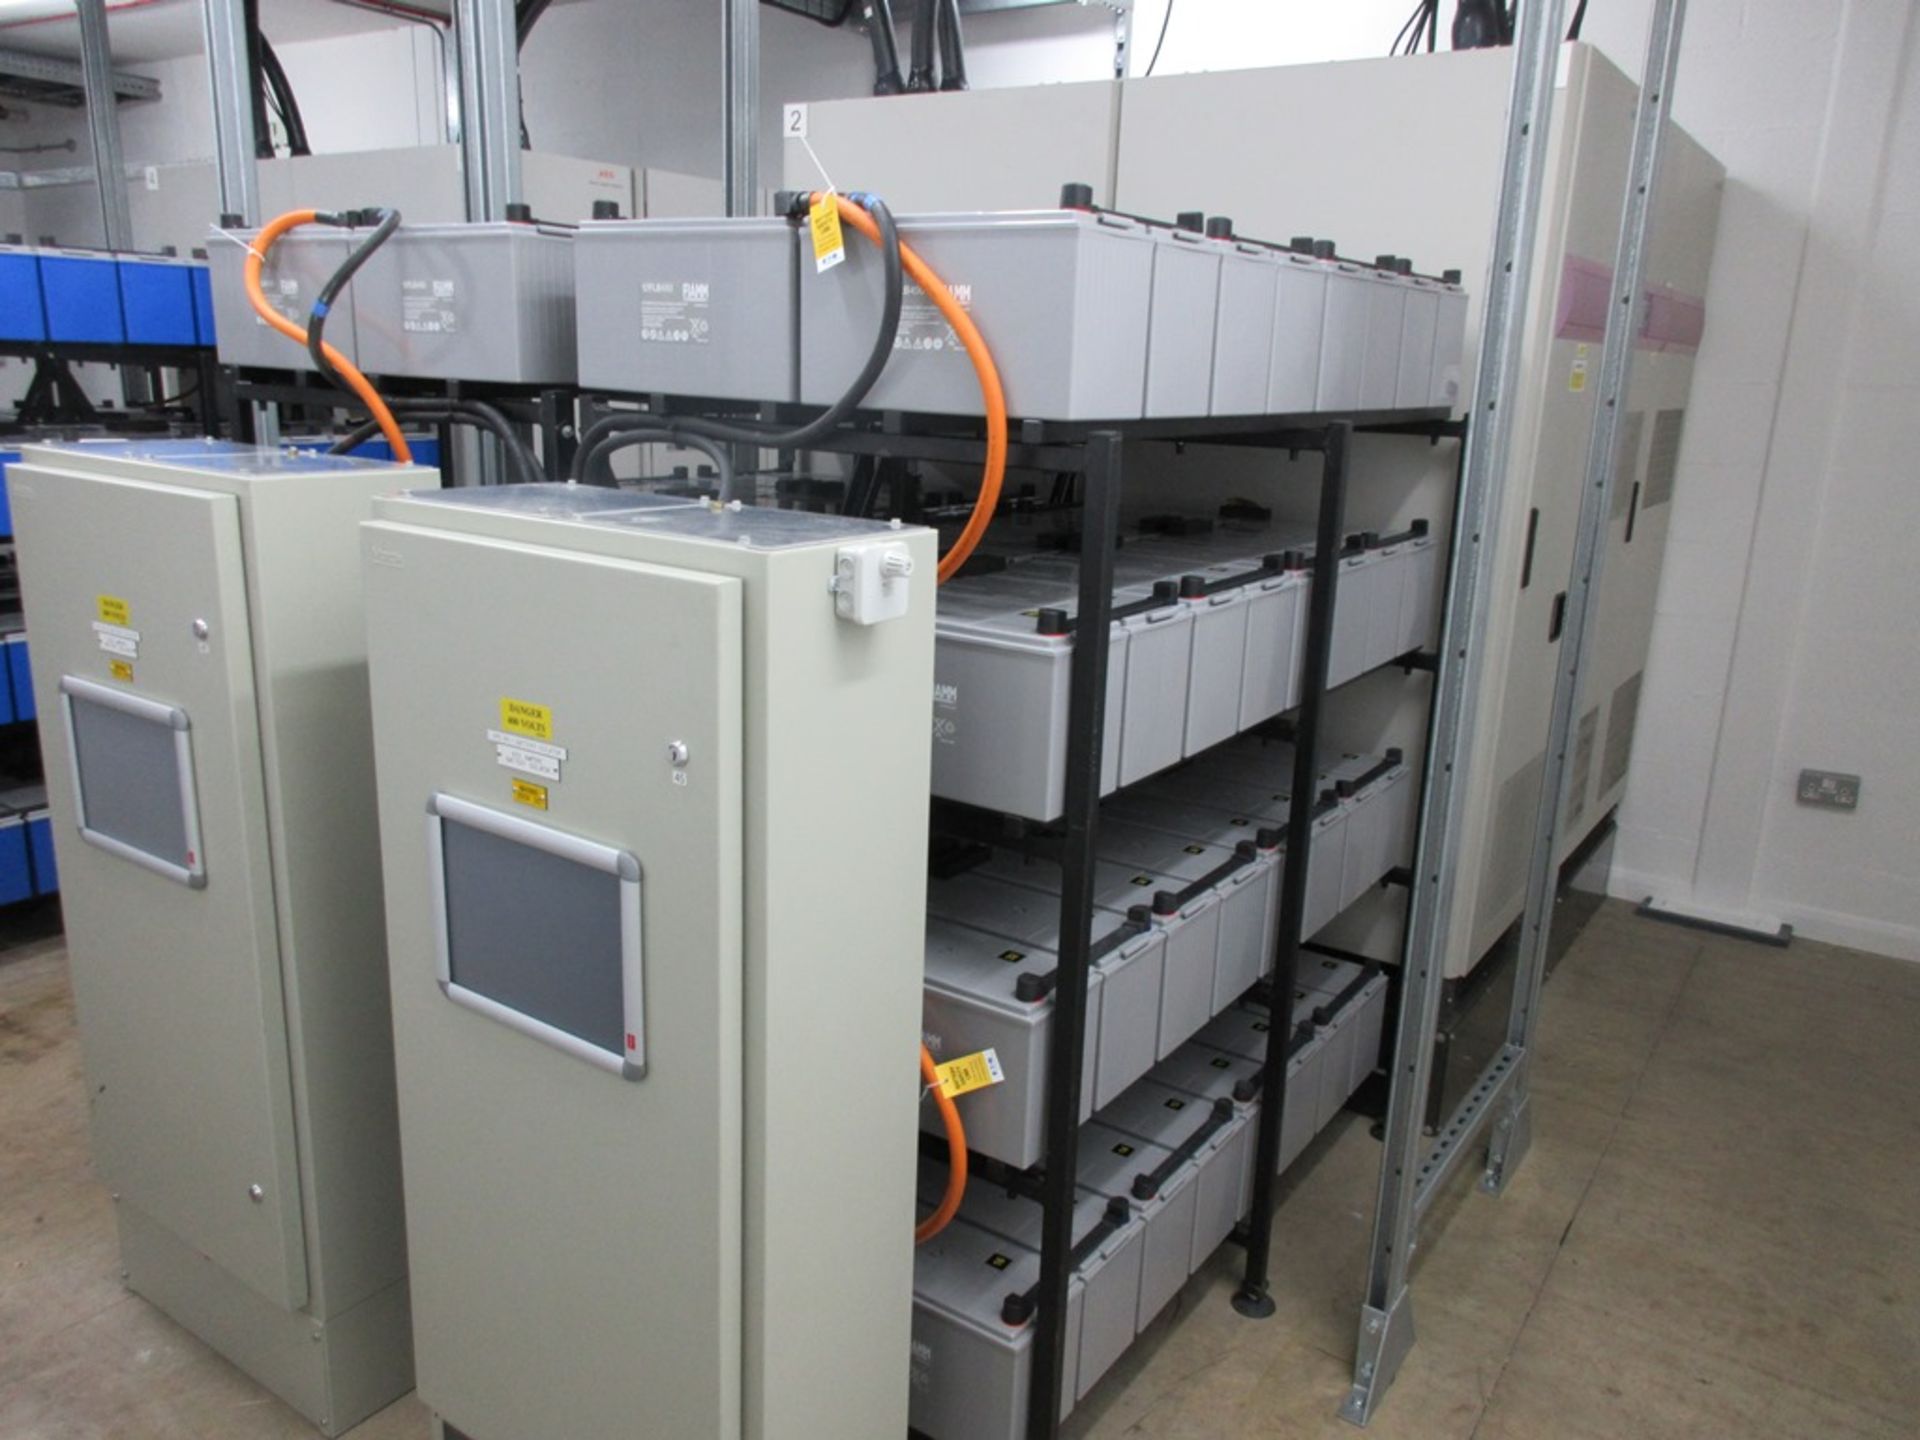 Six AEG Protect 4 uninterruptible power supply installations including battery racks and two PB135 - Image 10 of 14